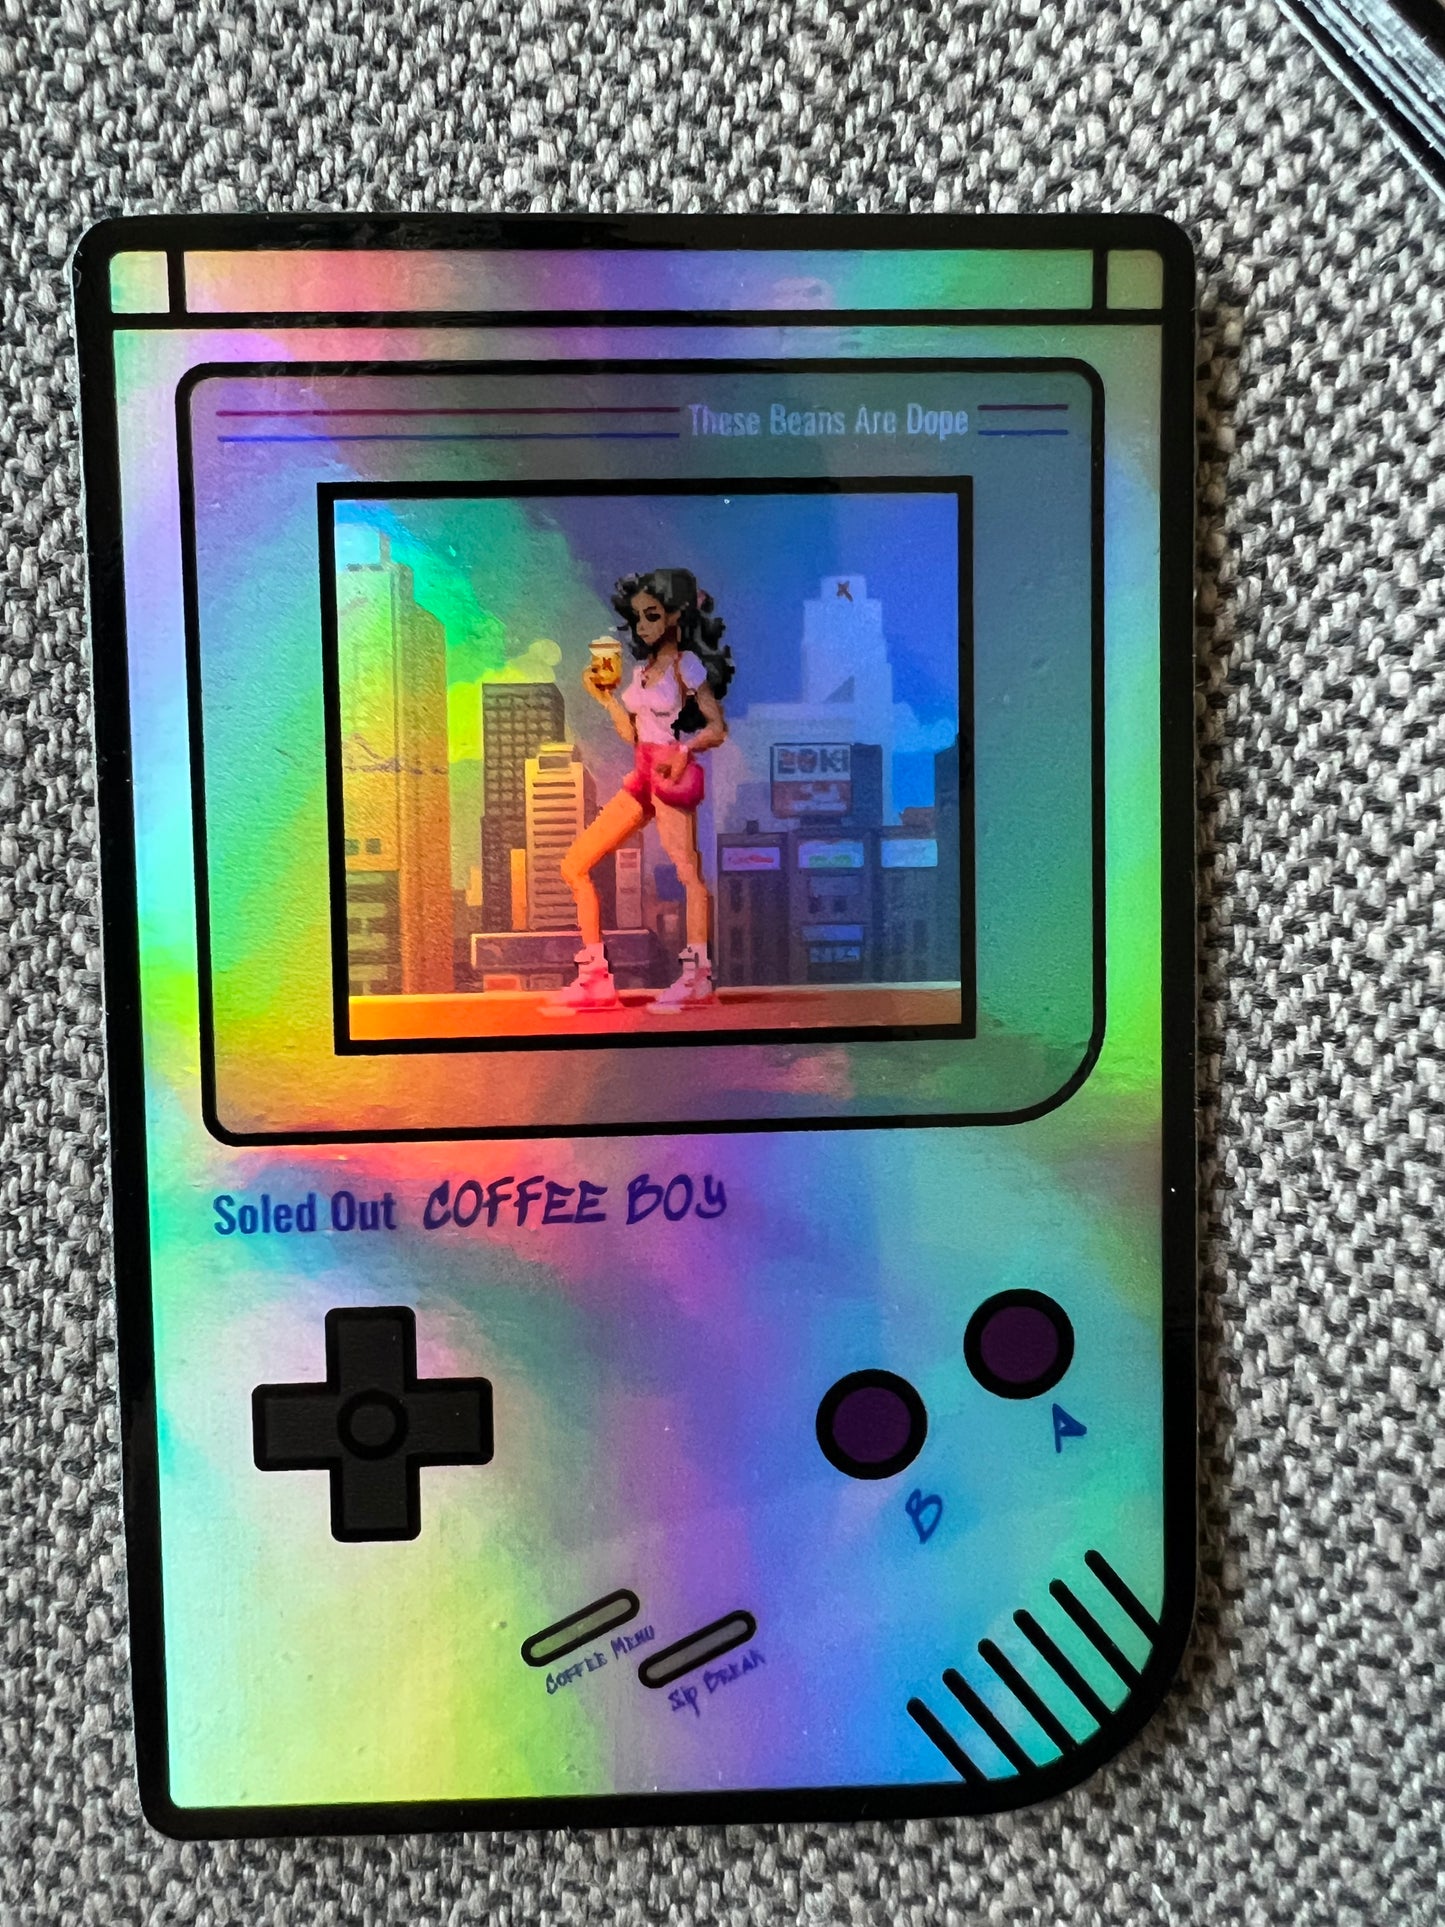 Soled Out Coffee Sticker - Coffee BOY (Holographic)